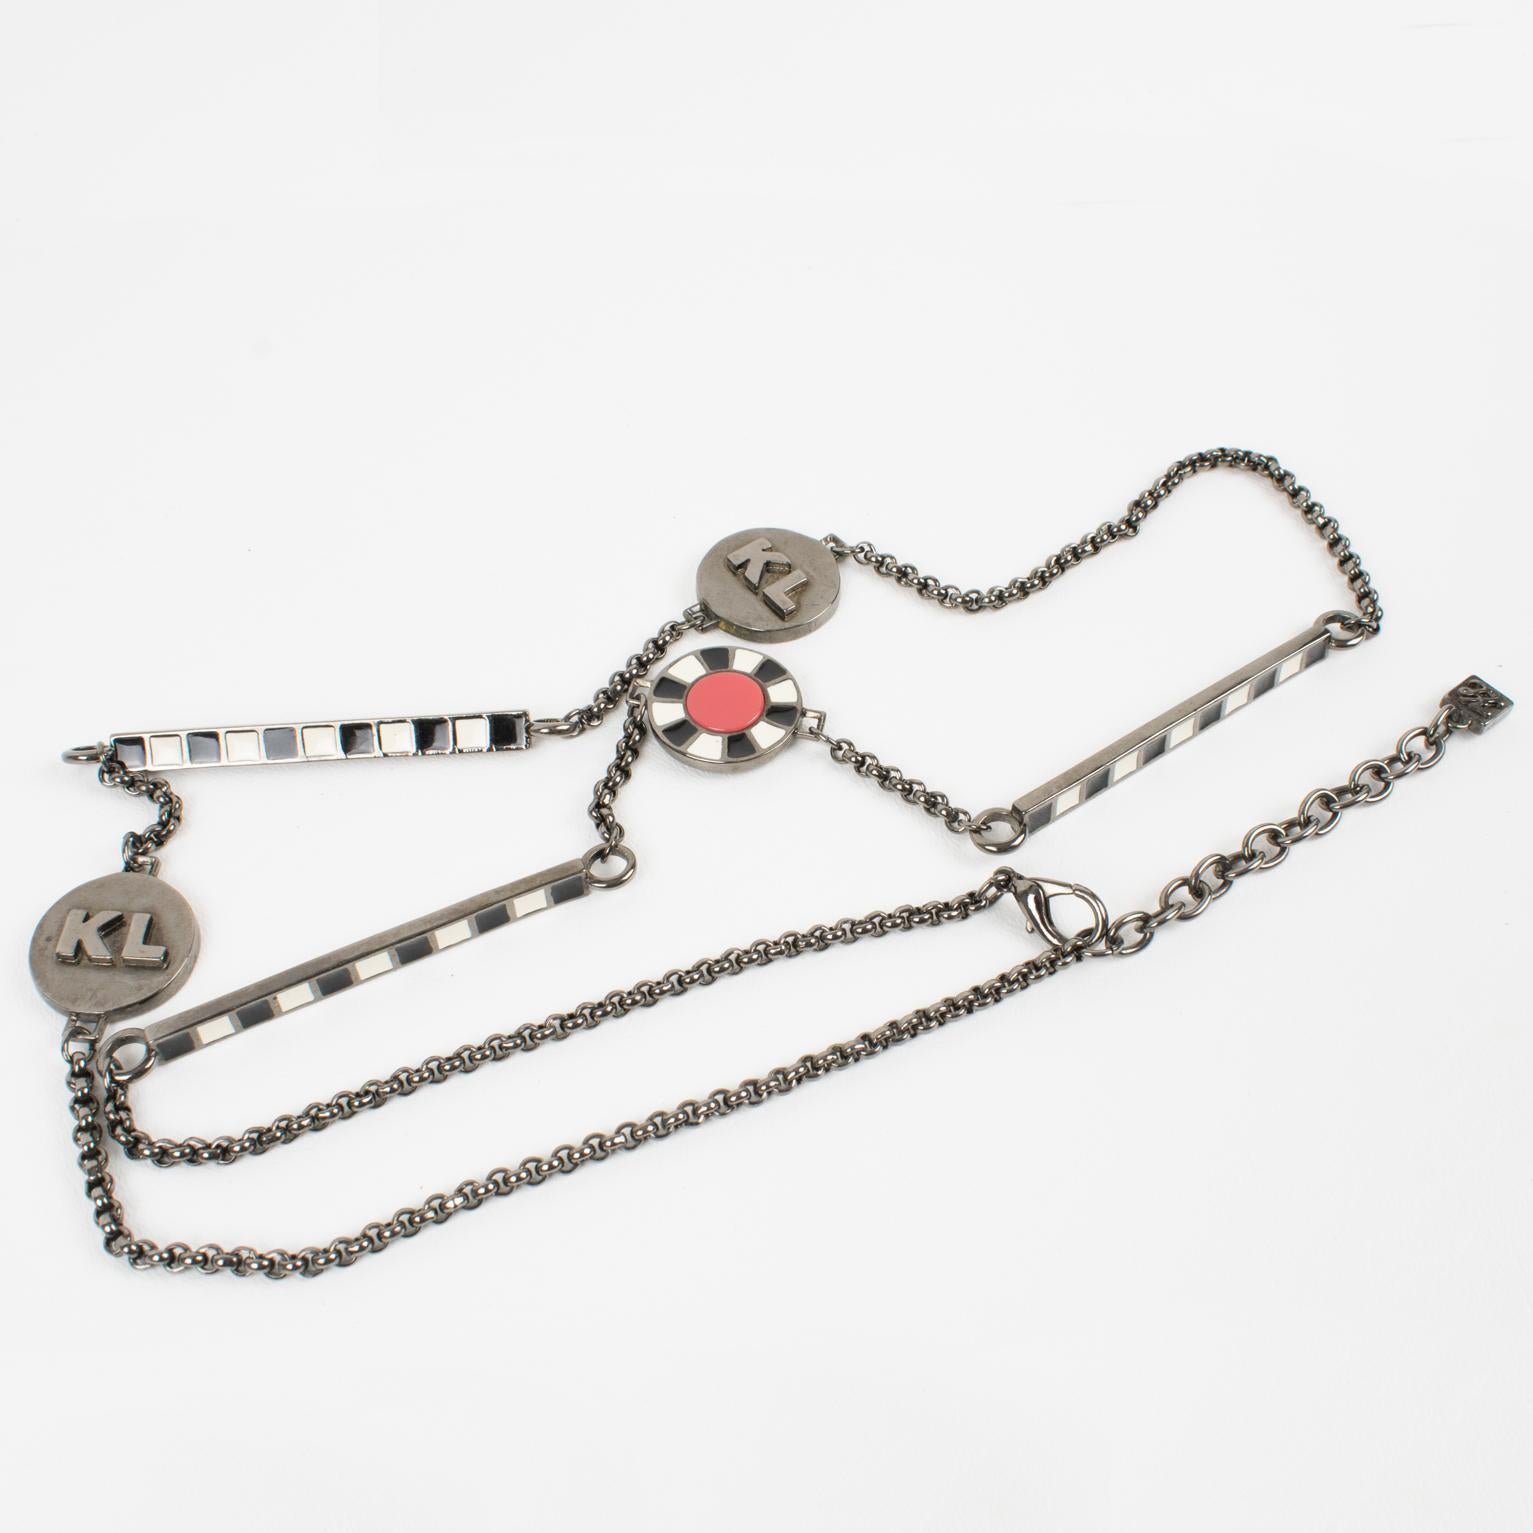 Karl Lagerfeld Gunmetal Long Necklace with Red and Black Enamel For Sale 5